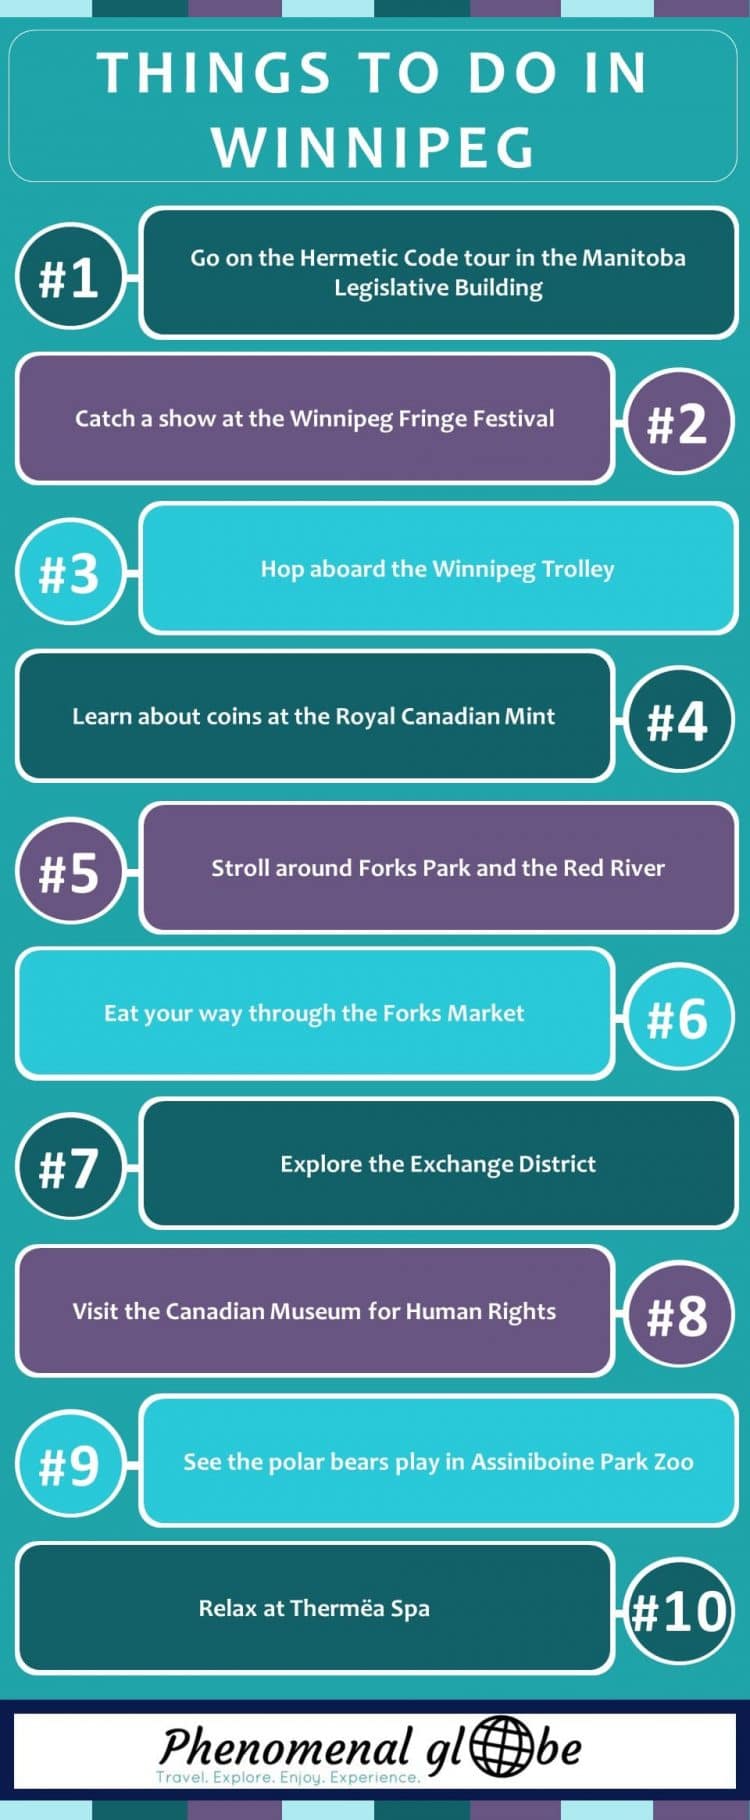 Wondering how to plan the perfect Winnipeg weekend? Check out the top things to do in Winnipeg + where to stay & what to eat! Visit the historic Exchange District, hop on the Winnipeg Trolley Tour and discover the secrets of the Manitoba Legislative Building. Relax at Thermëa Spa and eat your way around the Forks Market. Winnipeg, capital of Manitoba in beautiful Canada, has it all! #Winnipeg #OnlyInThePeg #Manitoba